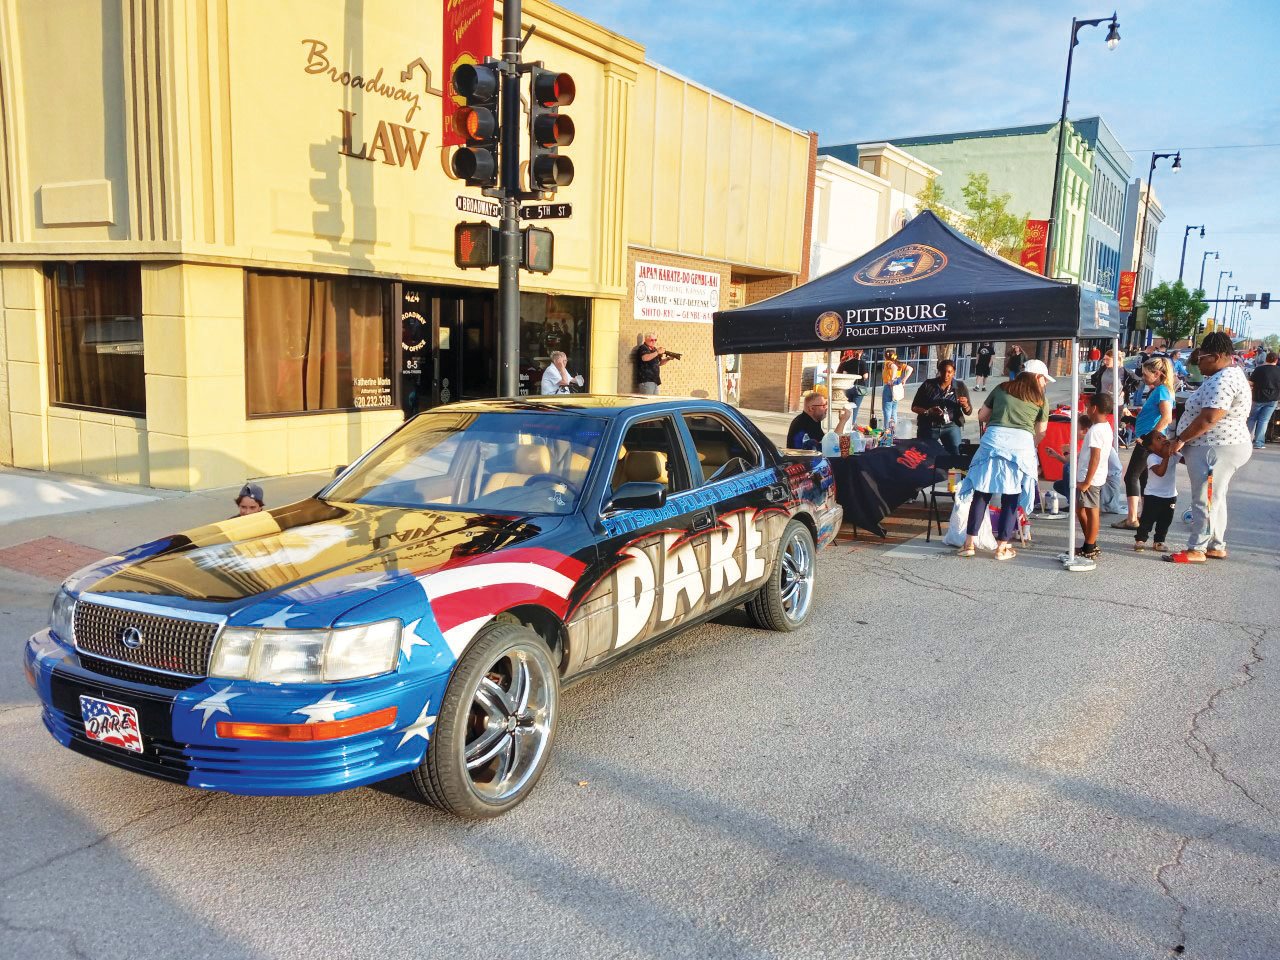 The Pittsburg Police Department was on hand Friday at the ArtWalk, with a booth and D.A.R.E. car.